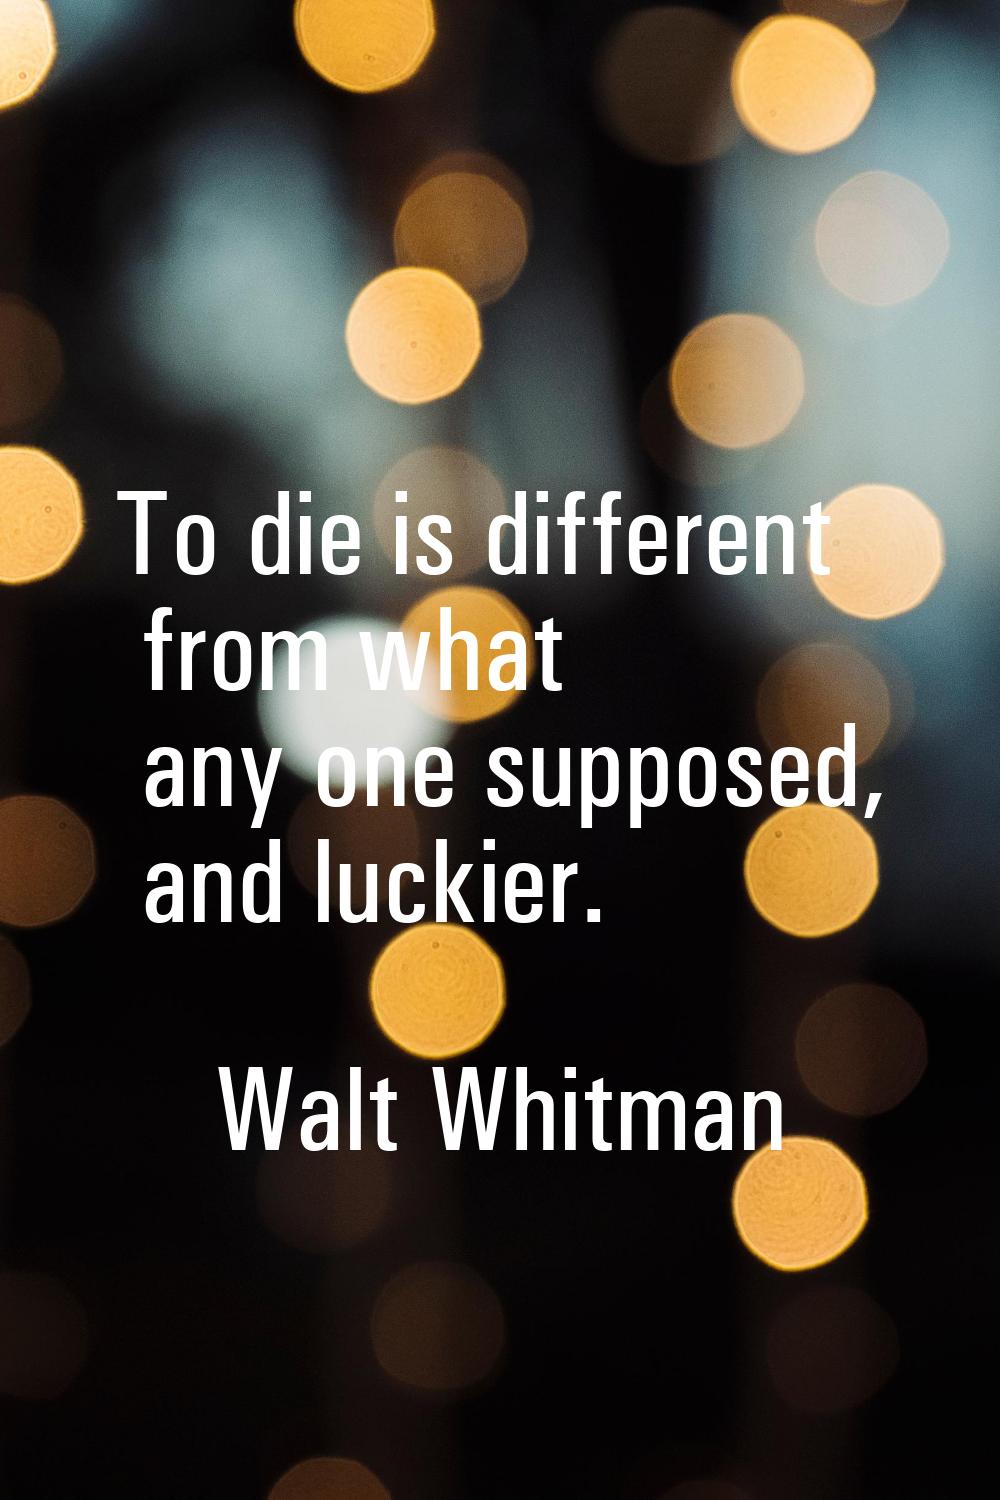 To die is different from what any one supposed, and luckier.